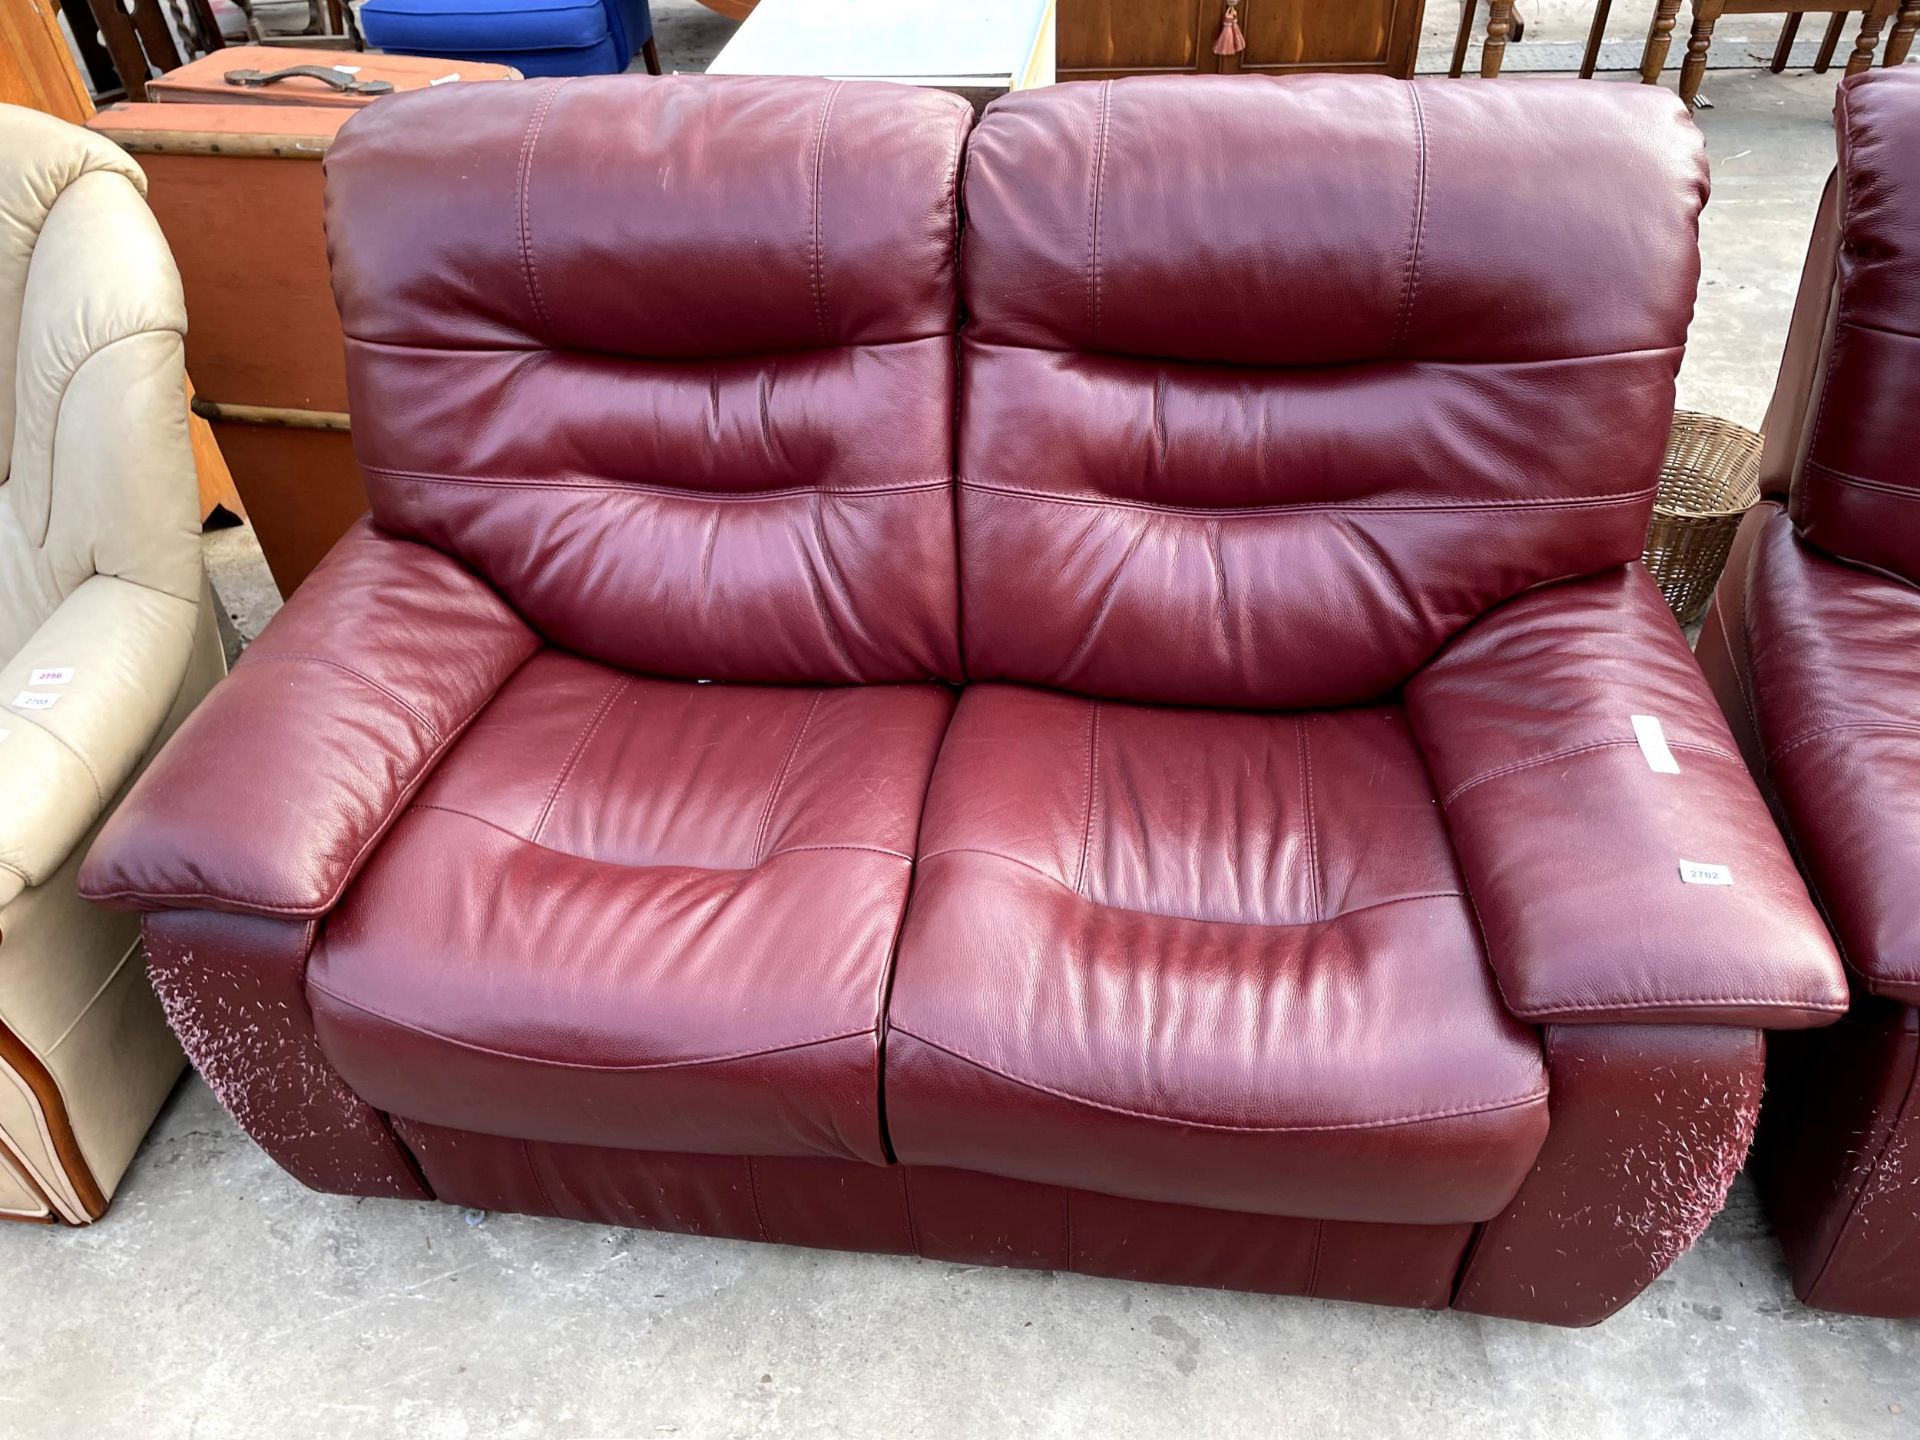 A MODERN LEATHER TWO SEATER SETTEE